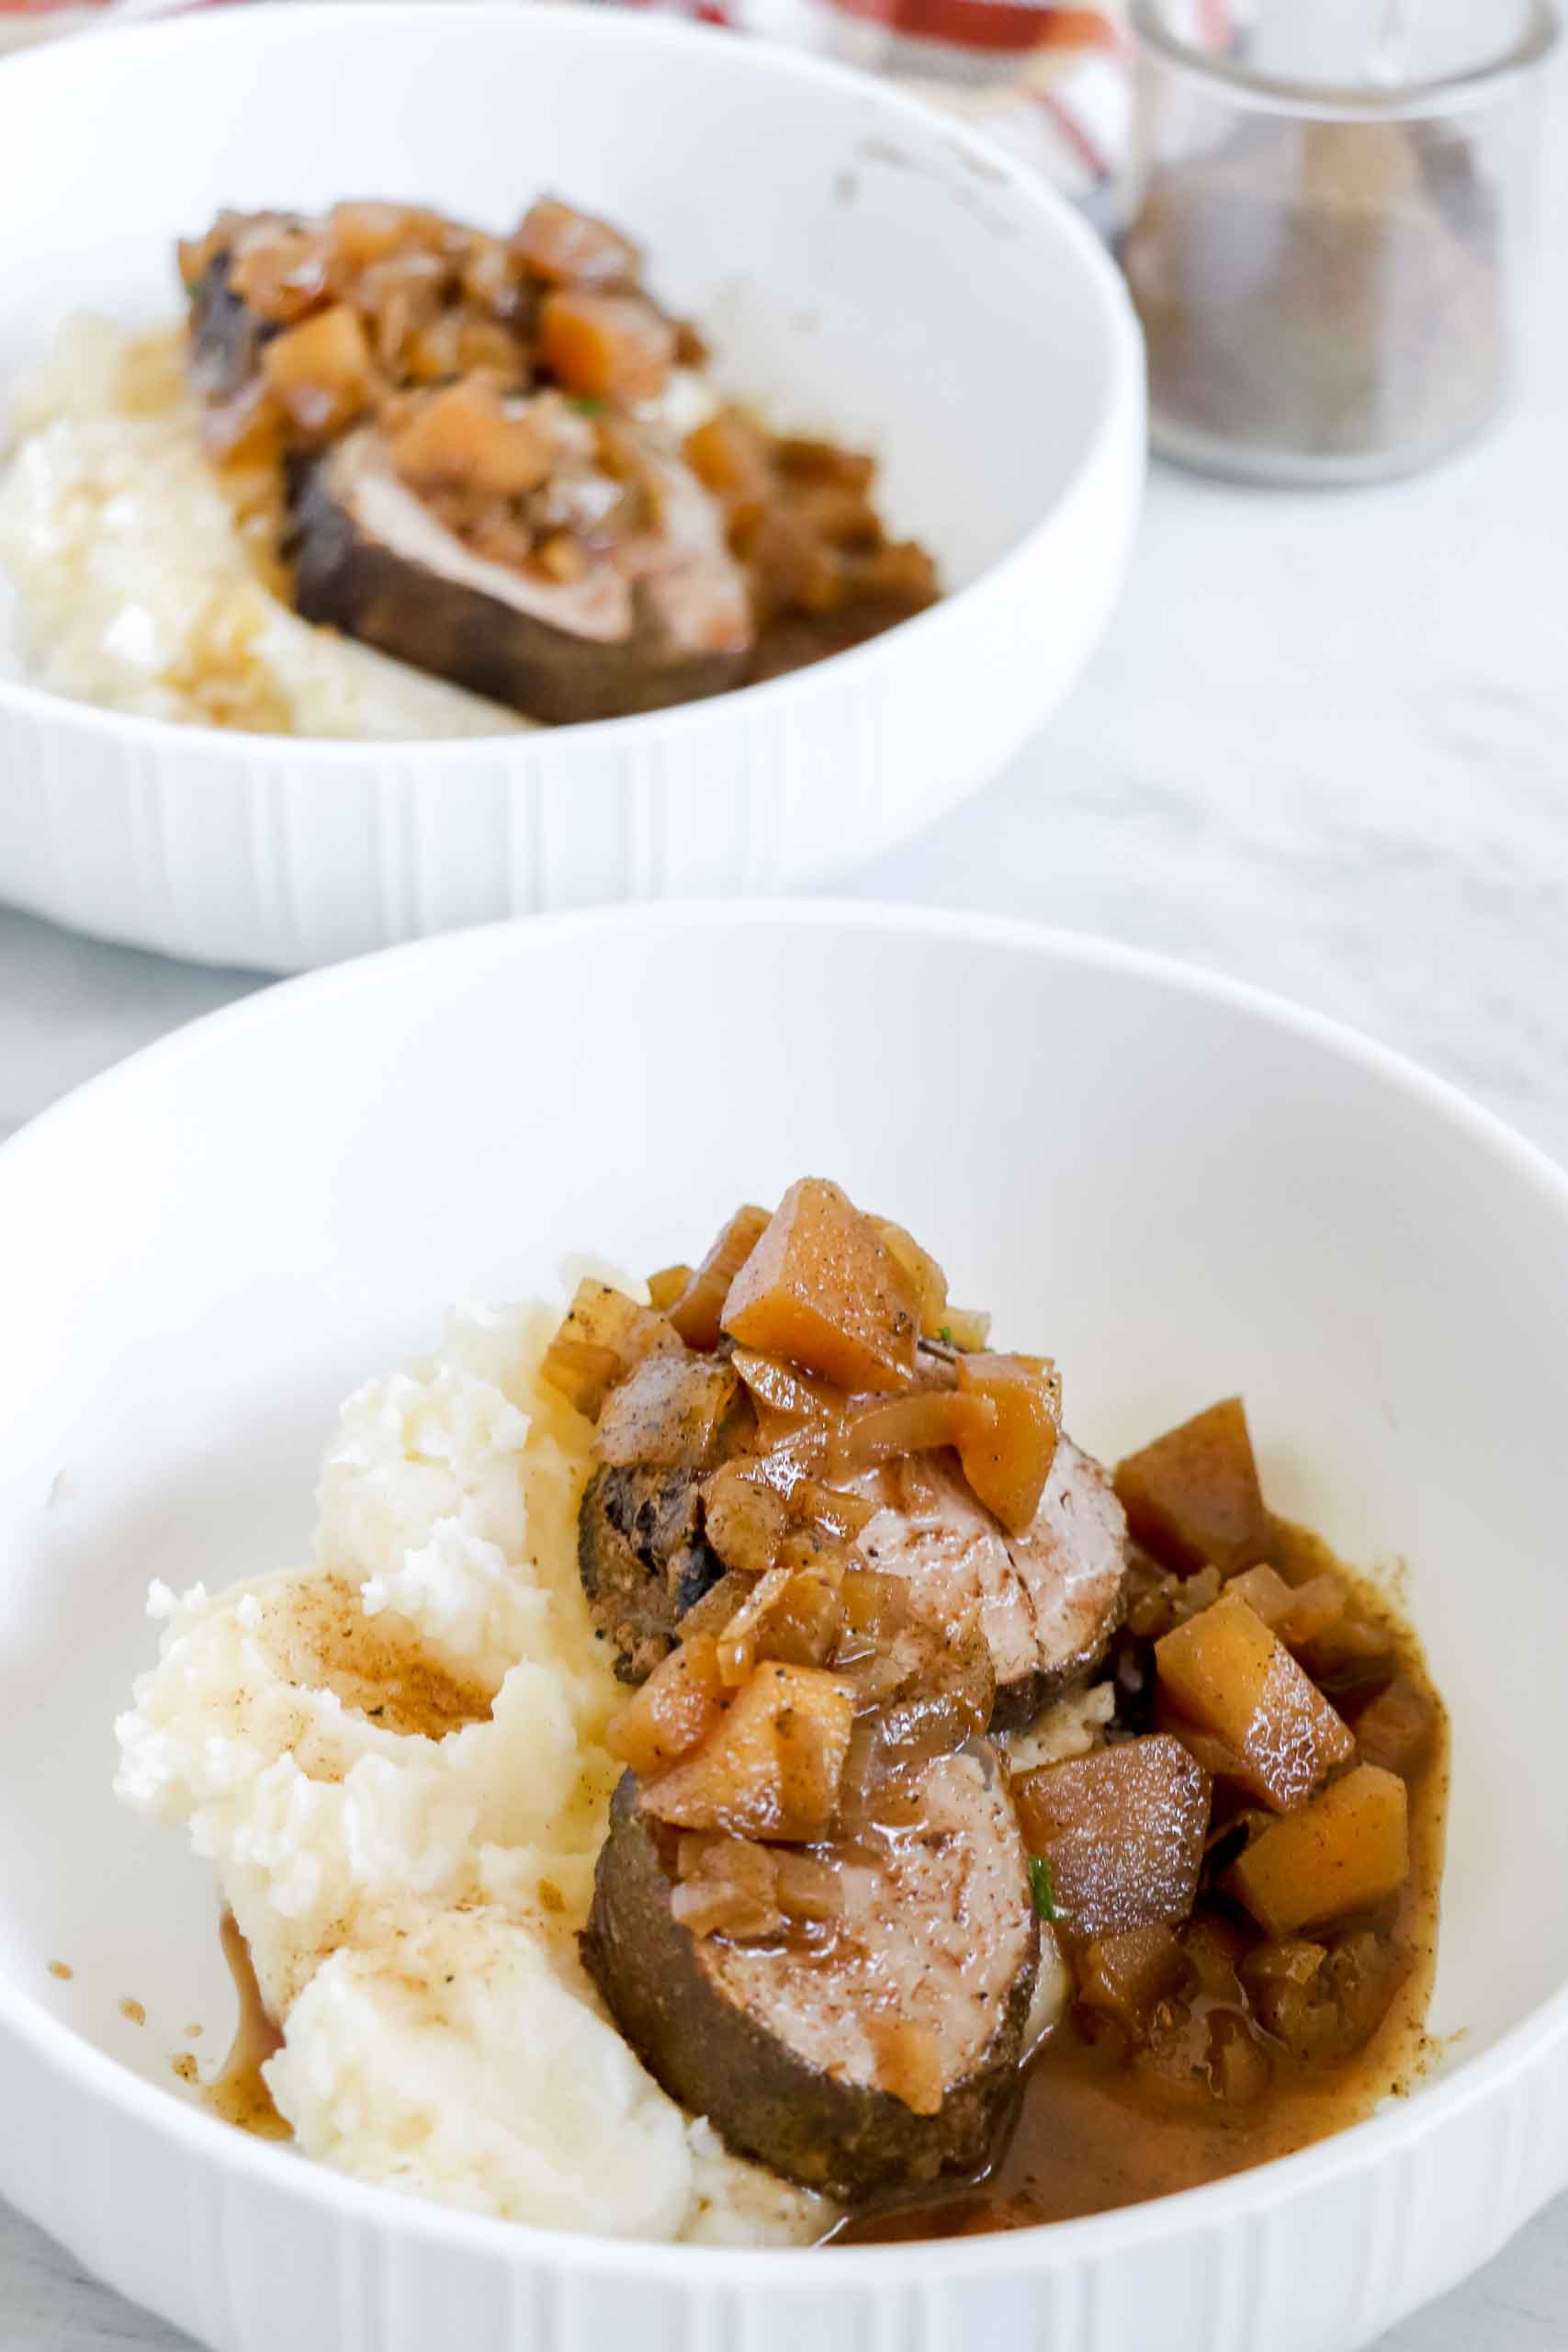 Pork tenderloin with Mashed Potatoes on a white plate with a plate of pork tenderloin with apples in the background. https://www.atwistedplate.com/pork-tenderloin-with-apples